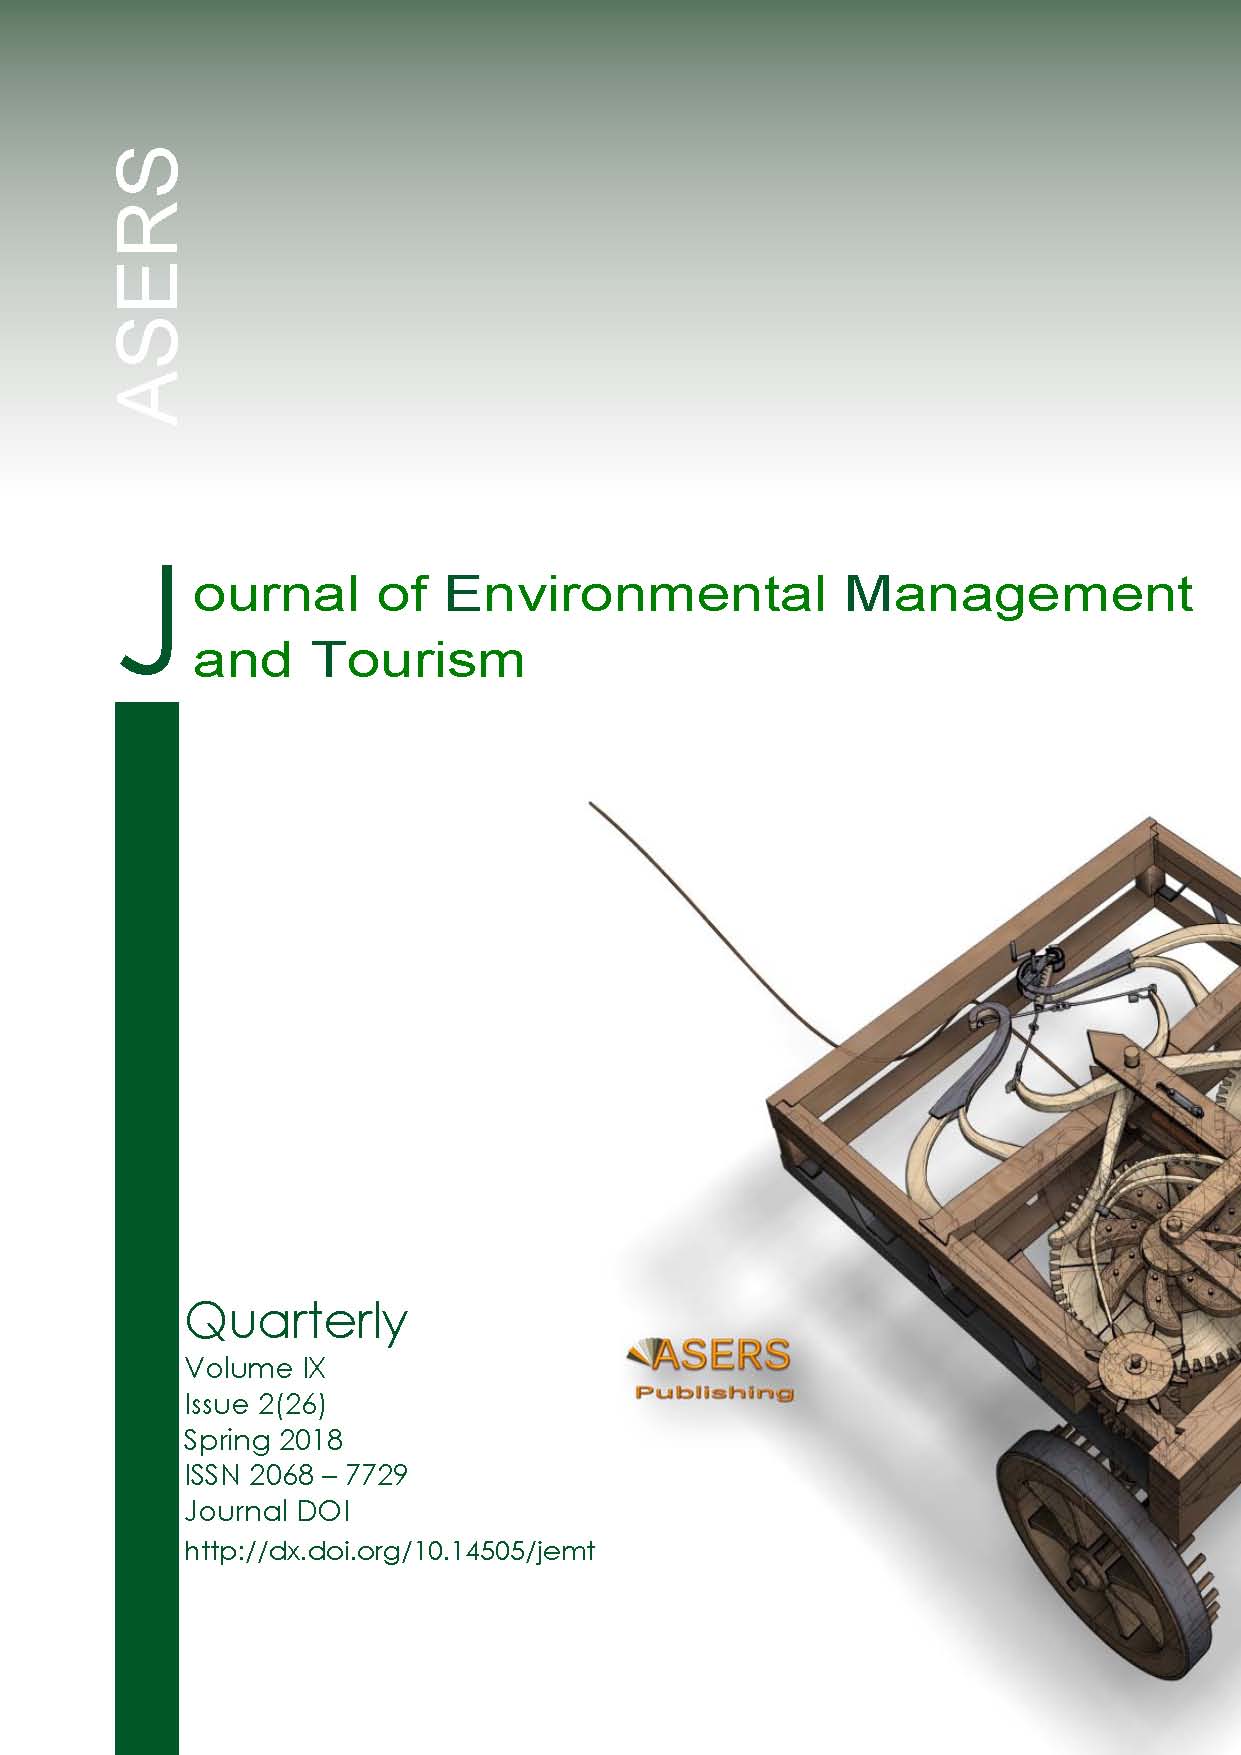 Modern Approaches to Assess Tourism Industry - Related Environment Cover Image